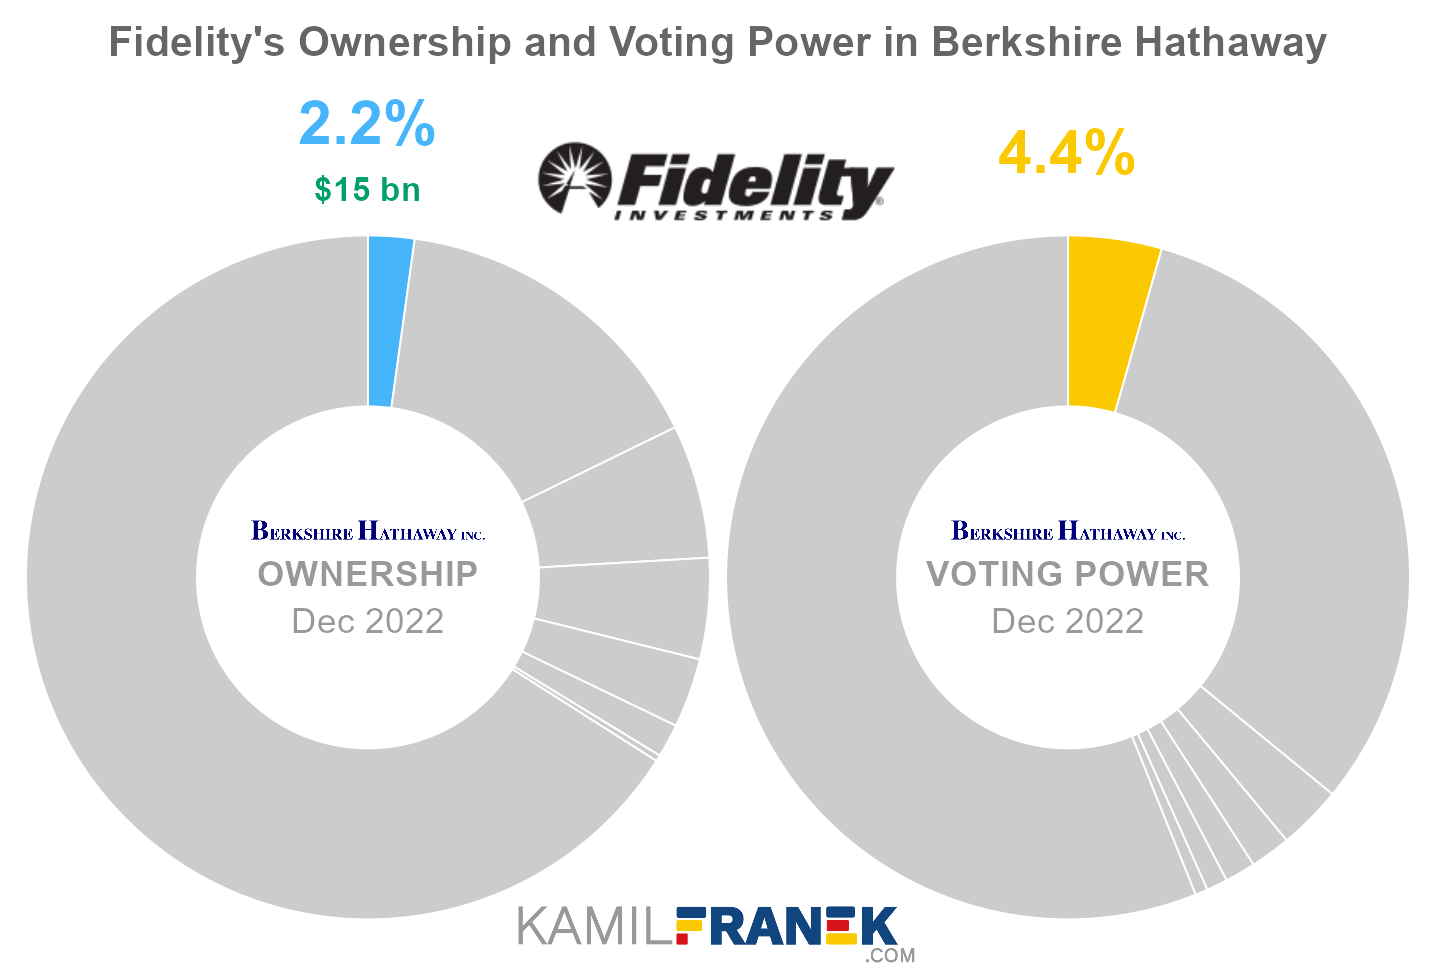 Fidelity's share ownership and voting power in Berkshire Hathaway (chart)